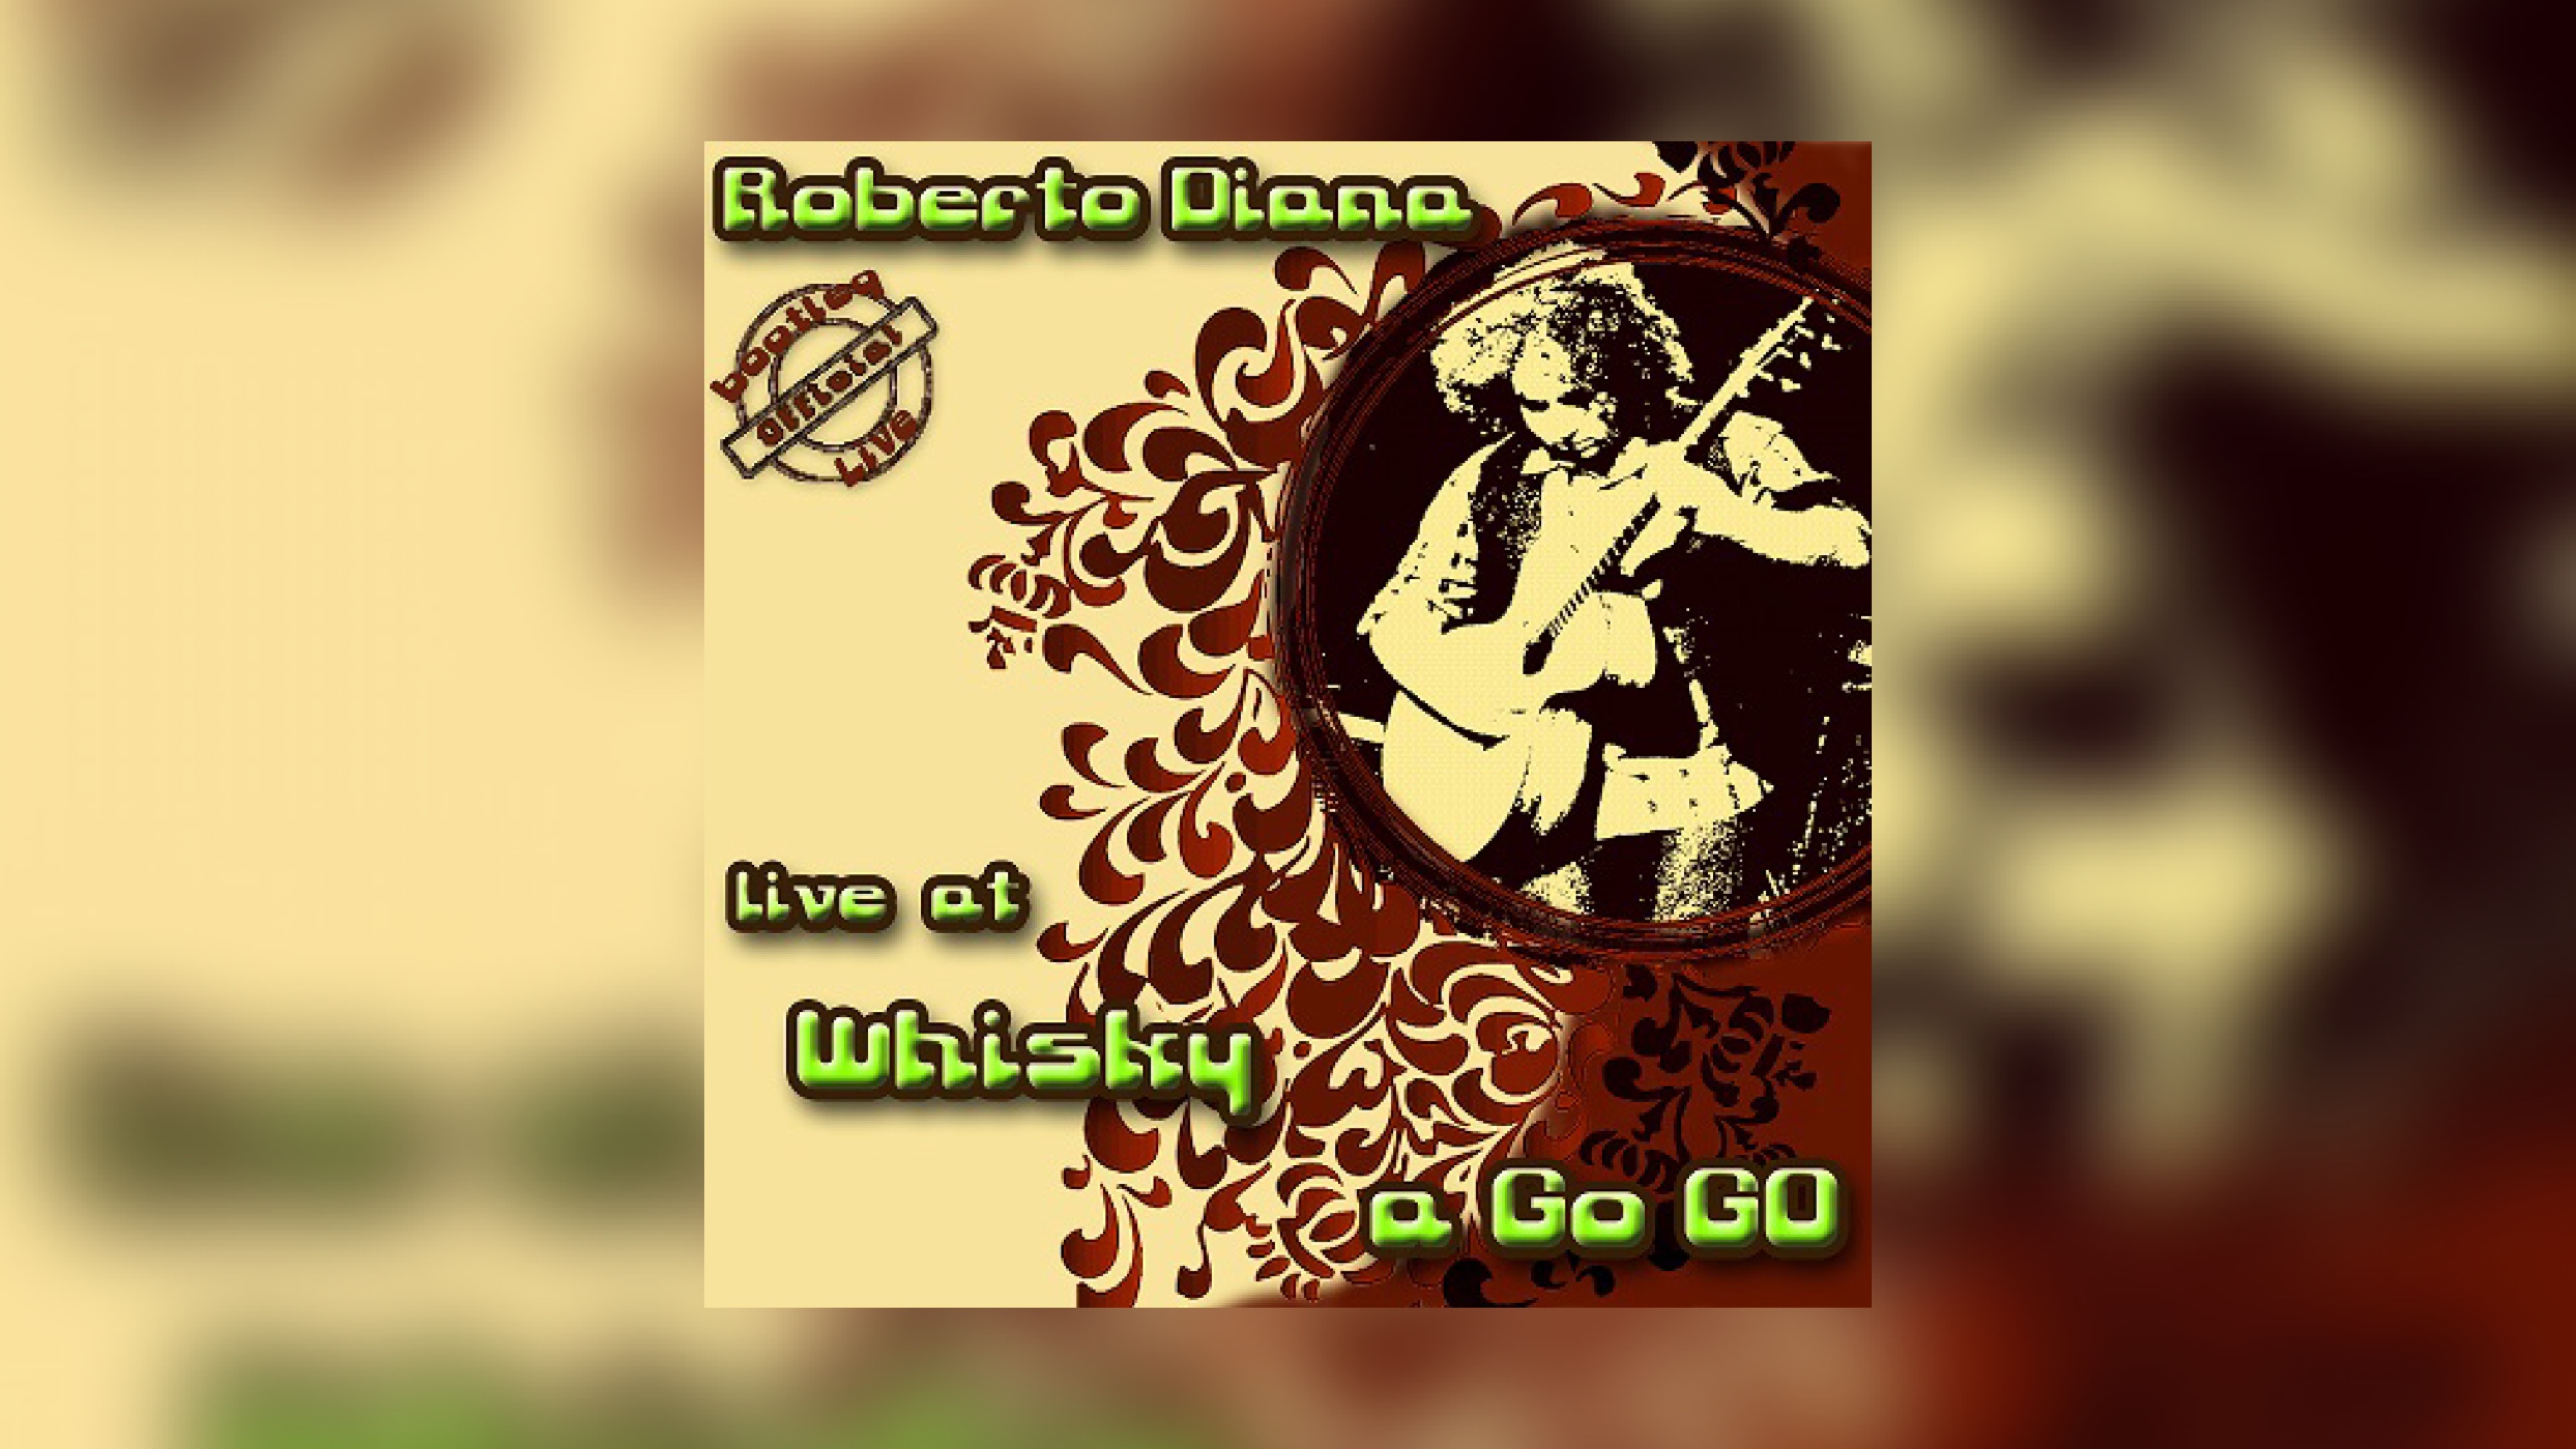 Roberto Diana – Live at The Whisky a Go Go (L.A.)